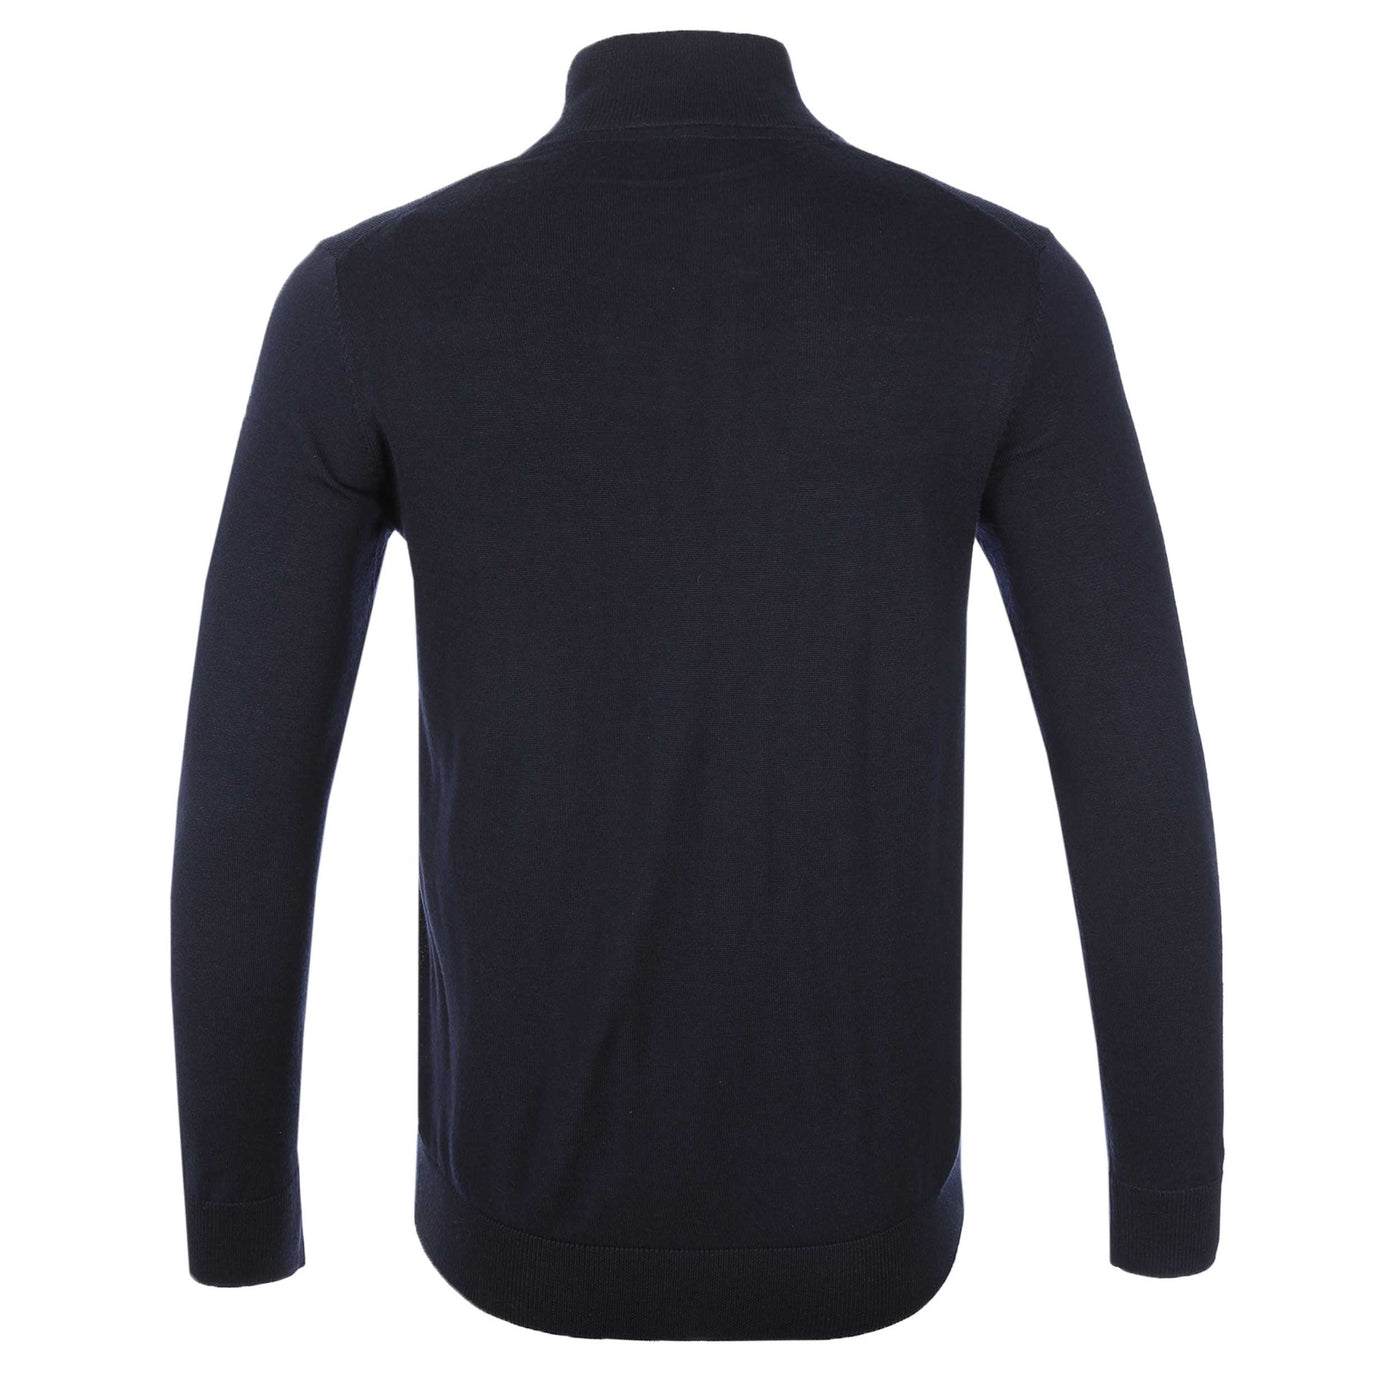 Thomas Maine 3 Button Funnel Neck Knitwear in Navy Back